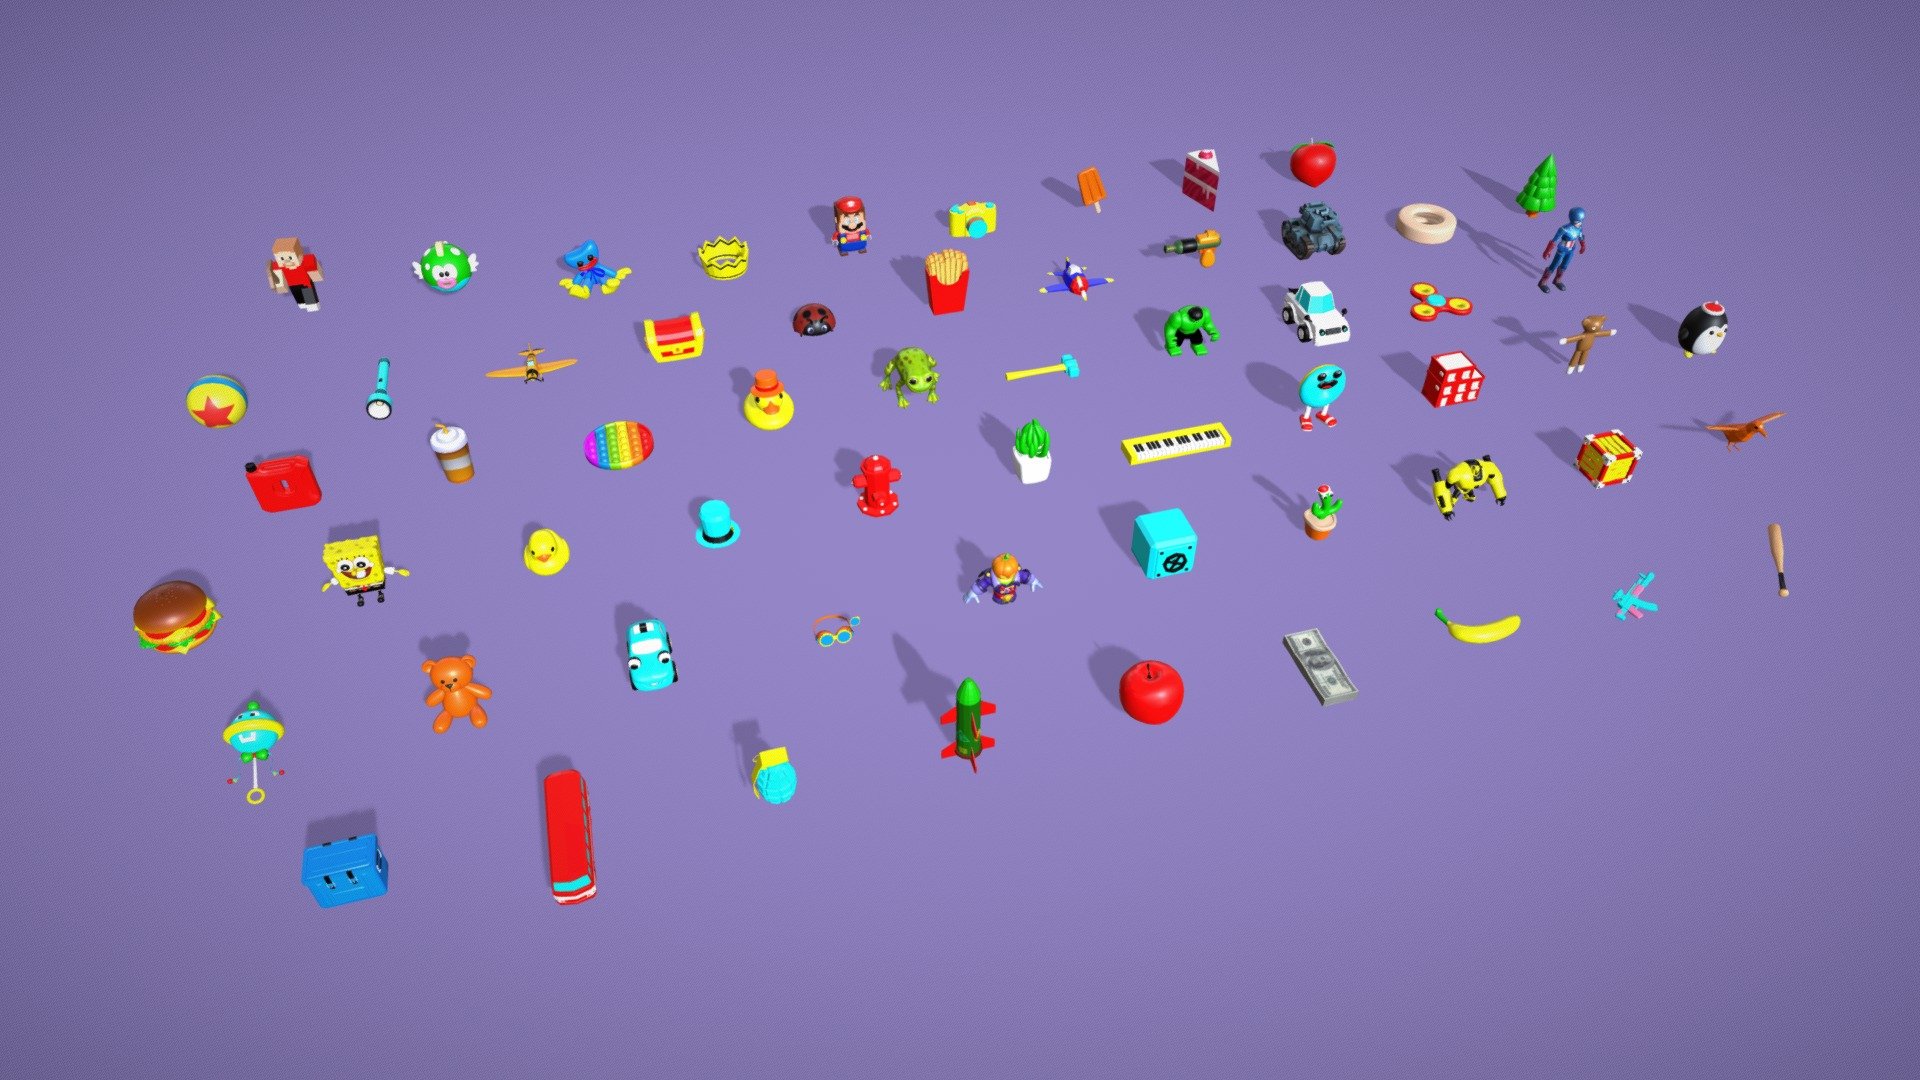 This package contains 60 Low poly cartoonish Toys in one pack.
This pack is suitable for Kid Learning games, Pair Matching Games rendering, galleries, or whatever you want.
Can be used for hyper-casual 3d Games.
You can create various color variants as per your needs by changing materials.

All the models are originally modeled in a blender.
Enjoy low poly toys pack. Leave valuable comments below. Thank you 3d model